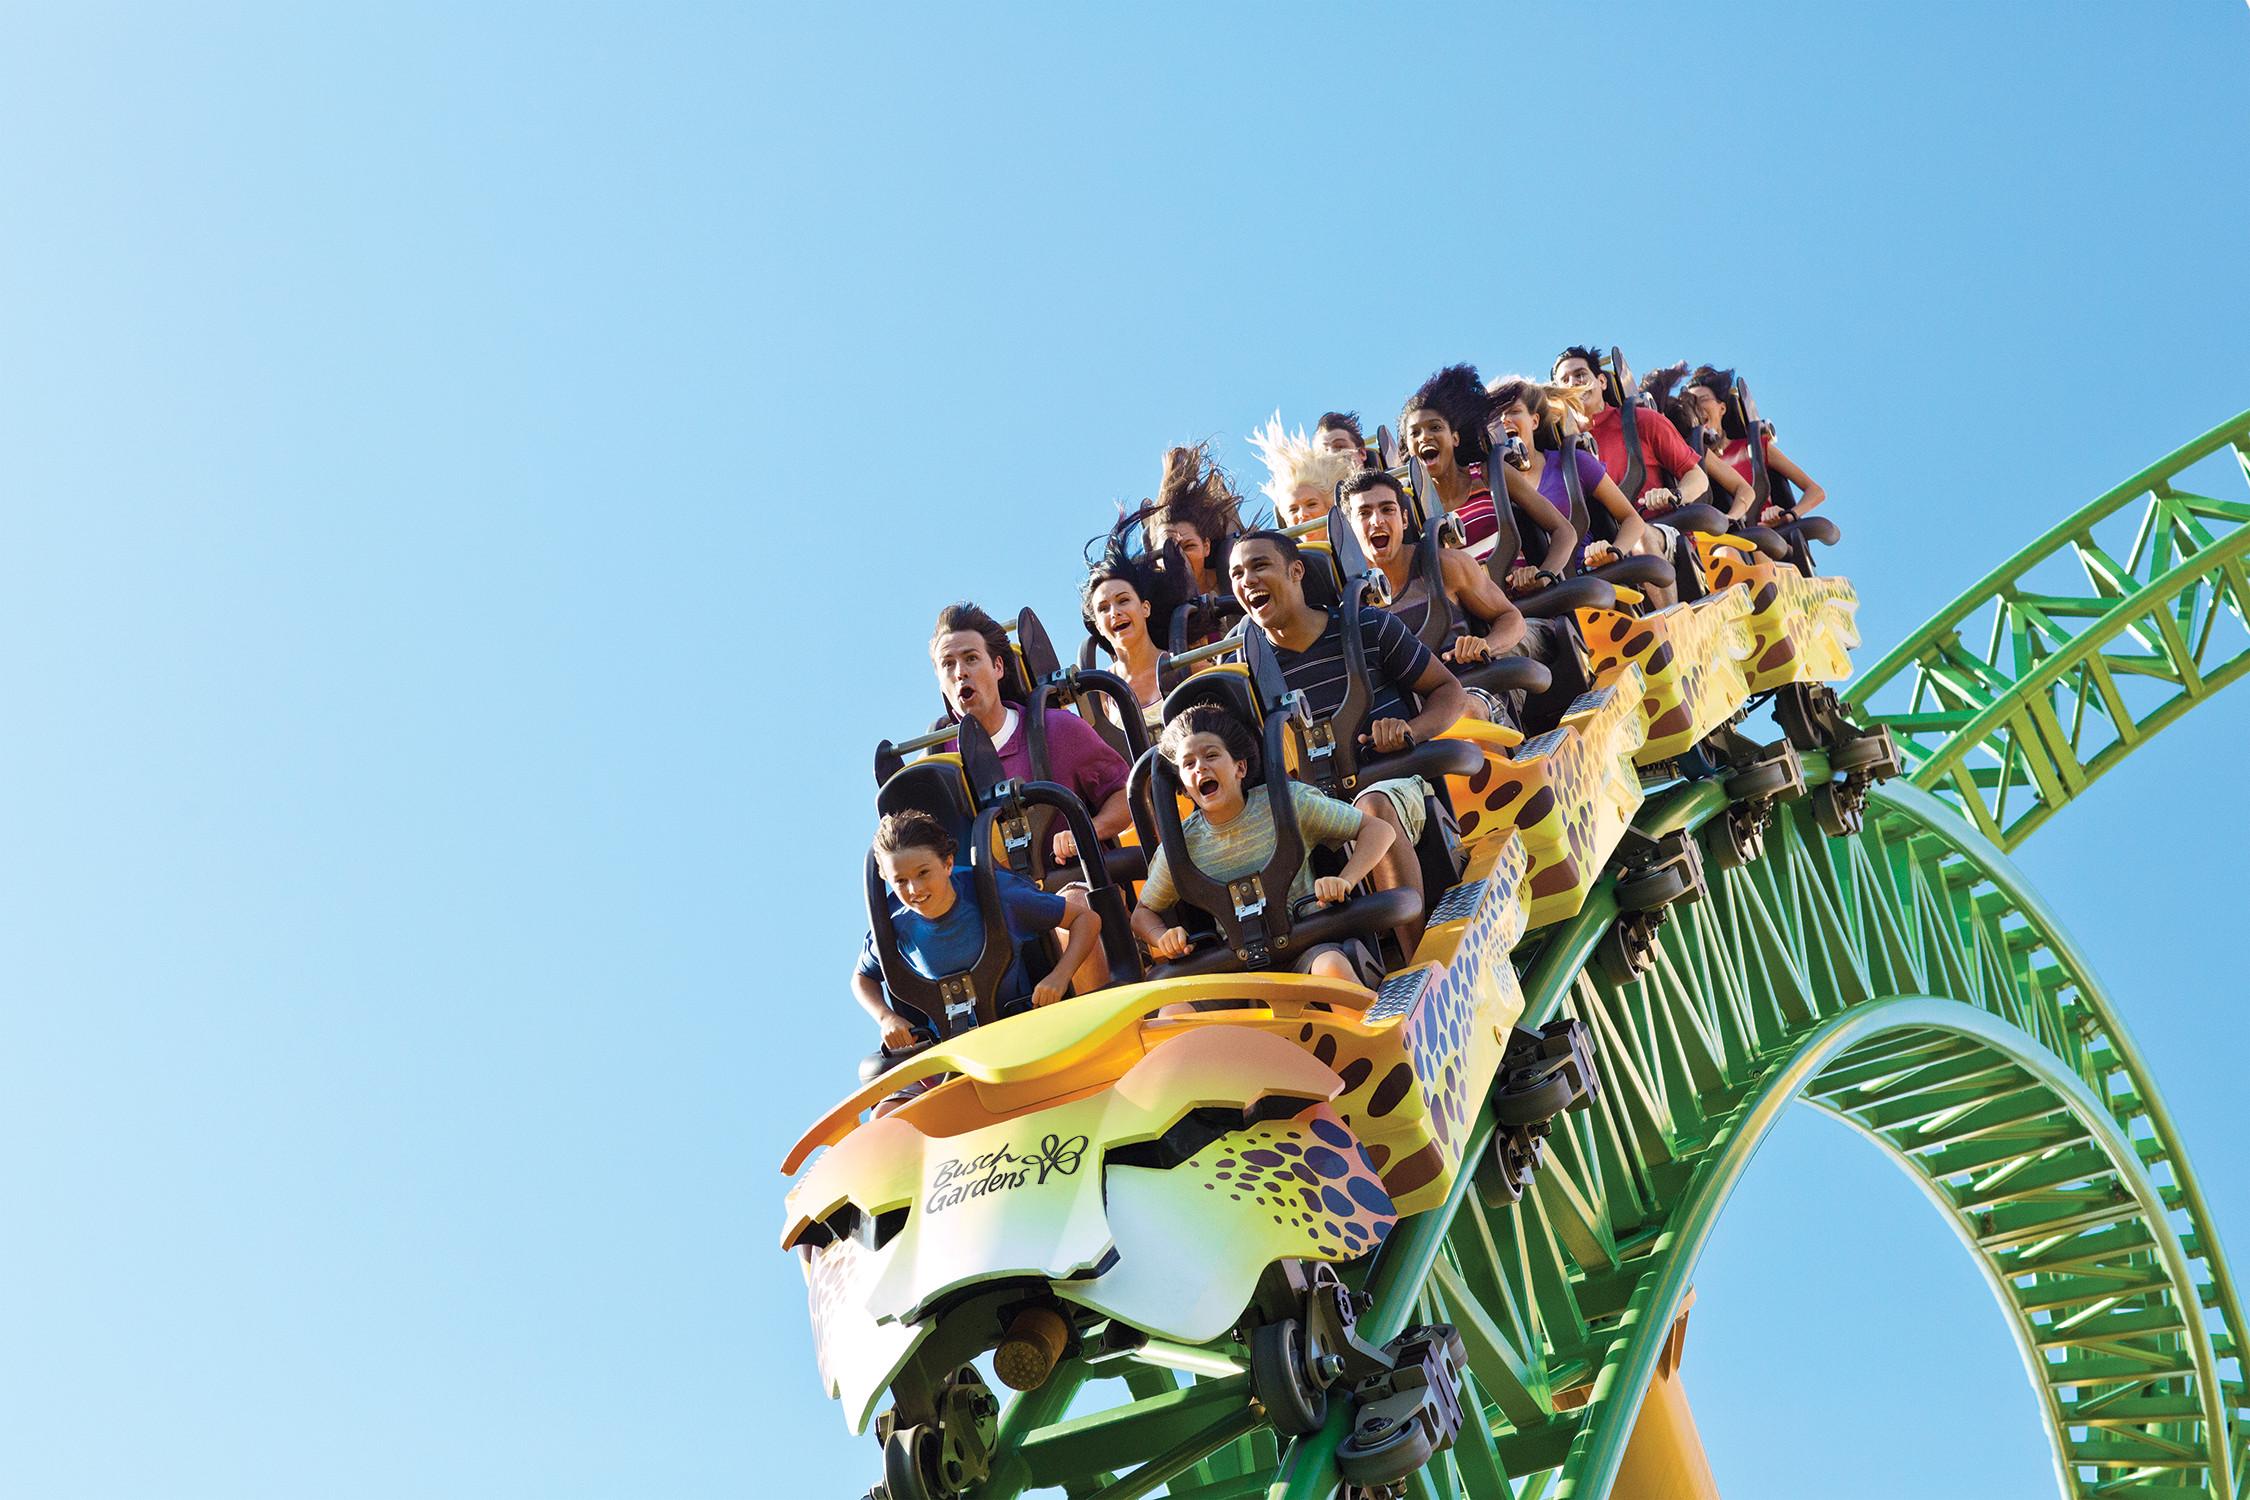 Take to the sky on Cheetah Hunt - Tampa Bay’s longest roller coaster